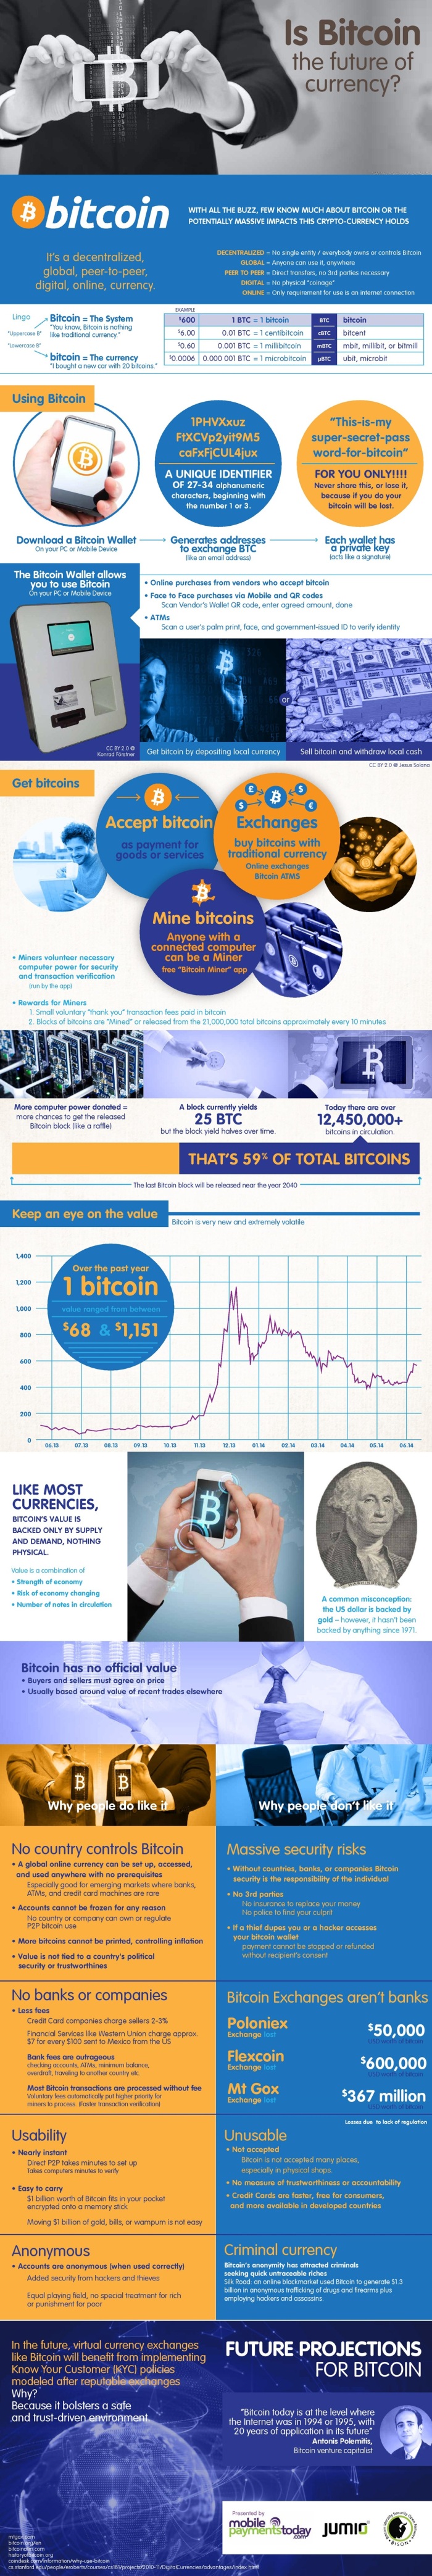 is_bitcoin_the_future_of_currency-page-1146